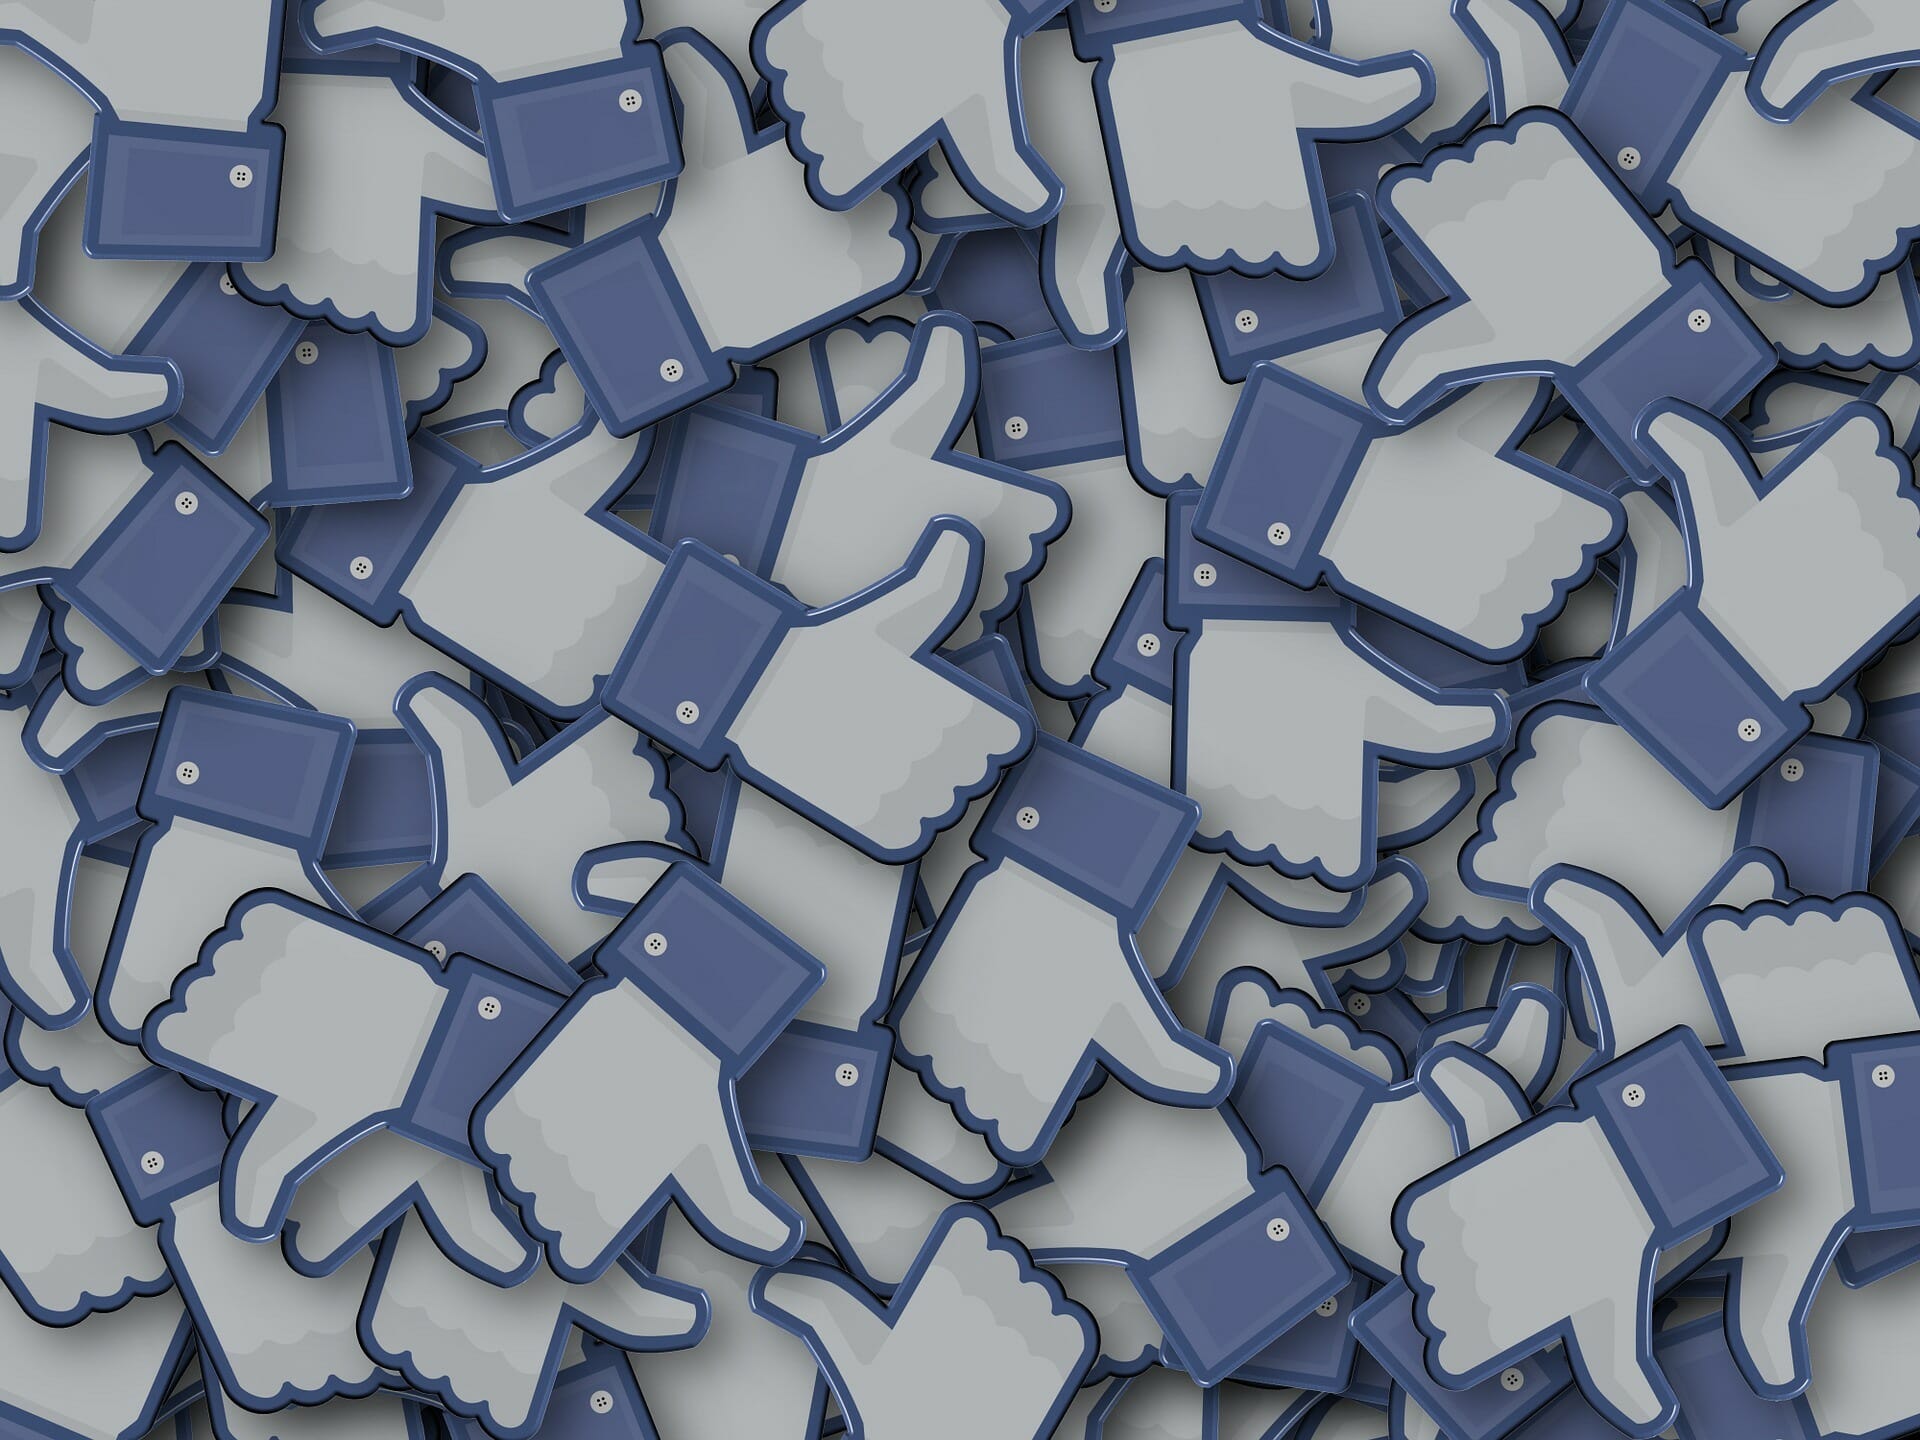 Blog image 6 Hidden Gems on Your Company’s Facebook Page